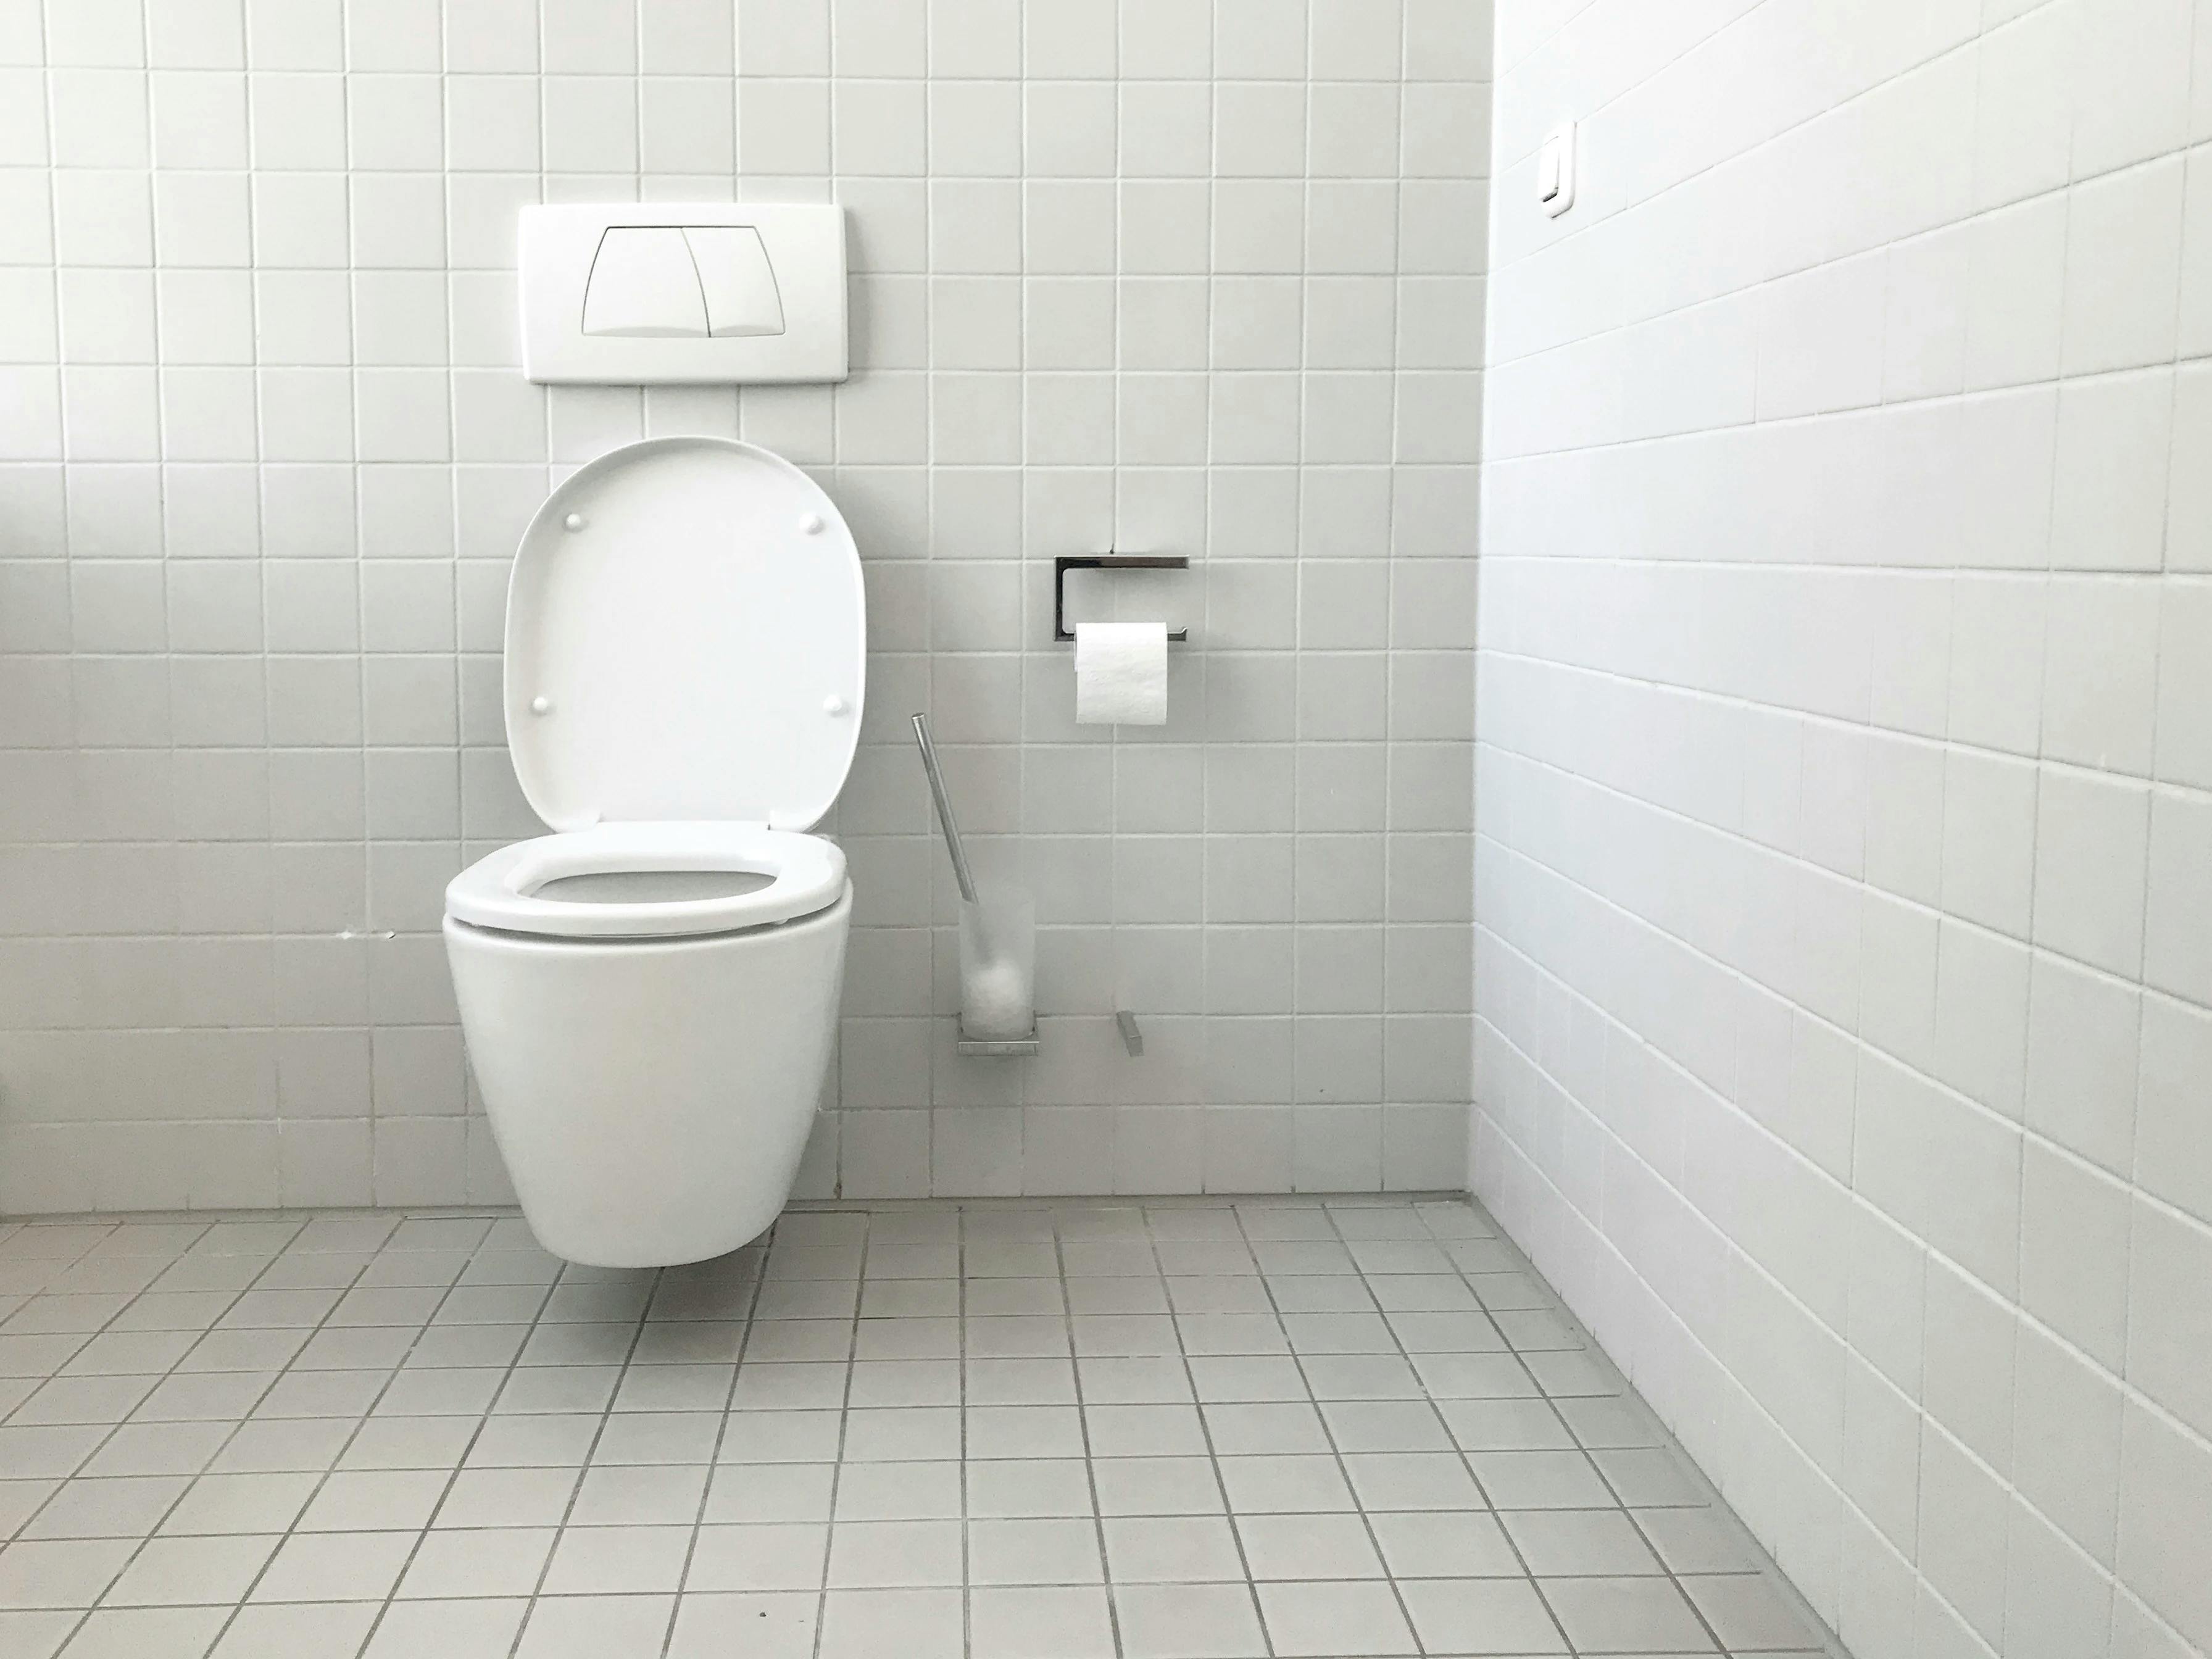 winseness plumbing co, plumbing experts, and clear drain installed commercial toilet